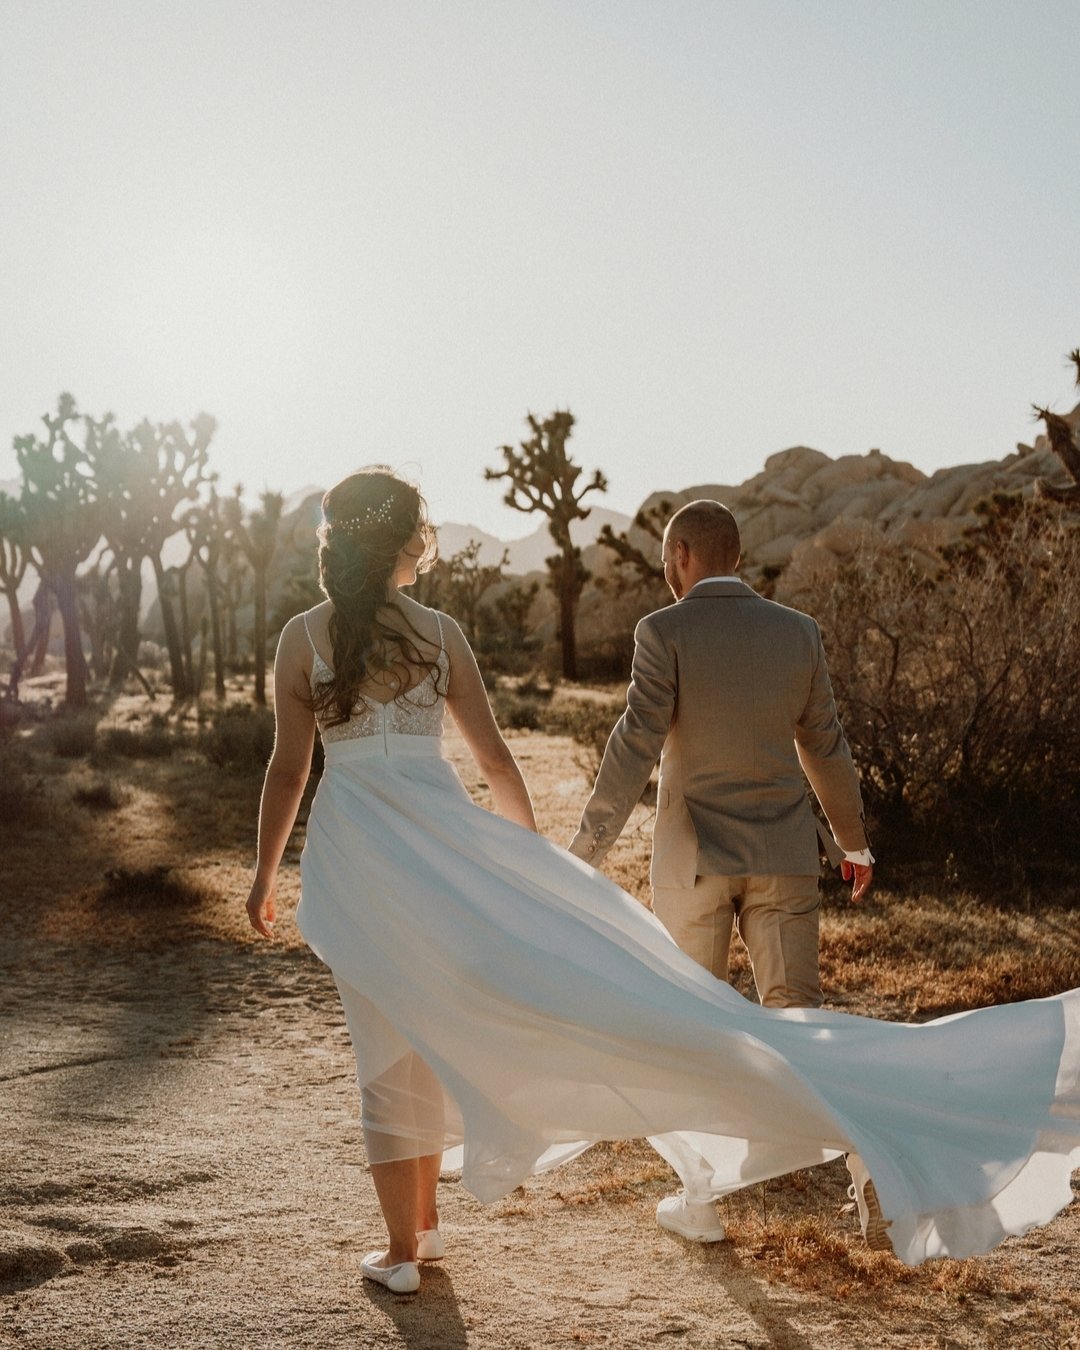 We have had so many gorgeous sessions lately we can't wait to share them all! 

#jennandpawelphotography #jennandpawel #scbmember #pawel_paparazzo #lettheadventurebegin #adventurecouple #joshuatreeelopementphotography #joshuatreeelopement #joshuatree